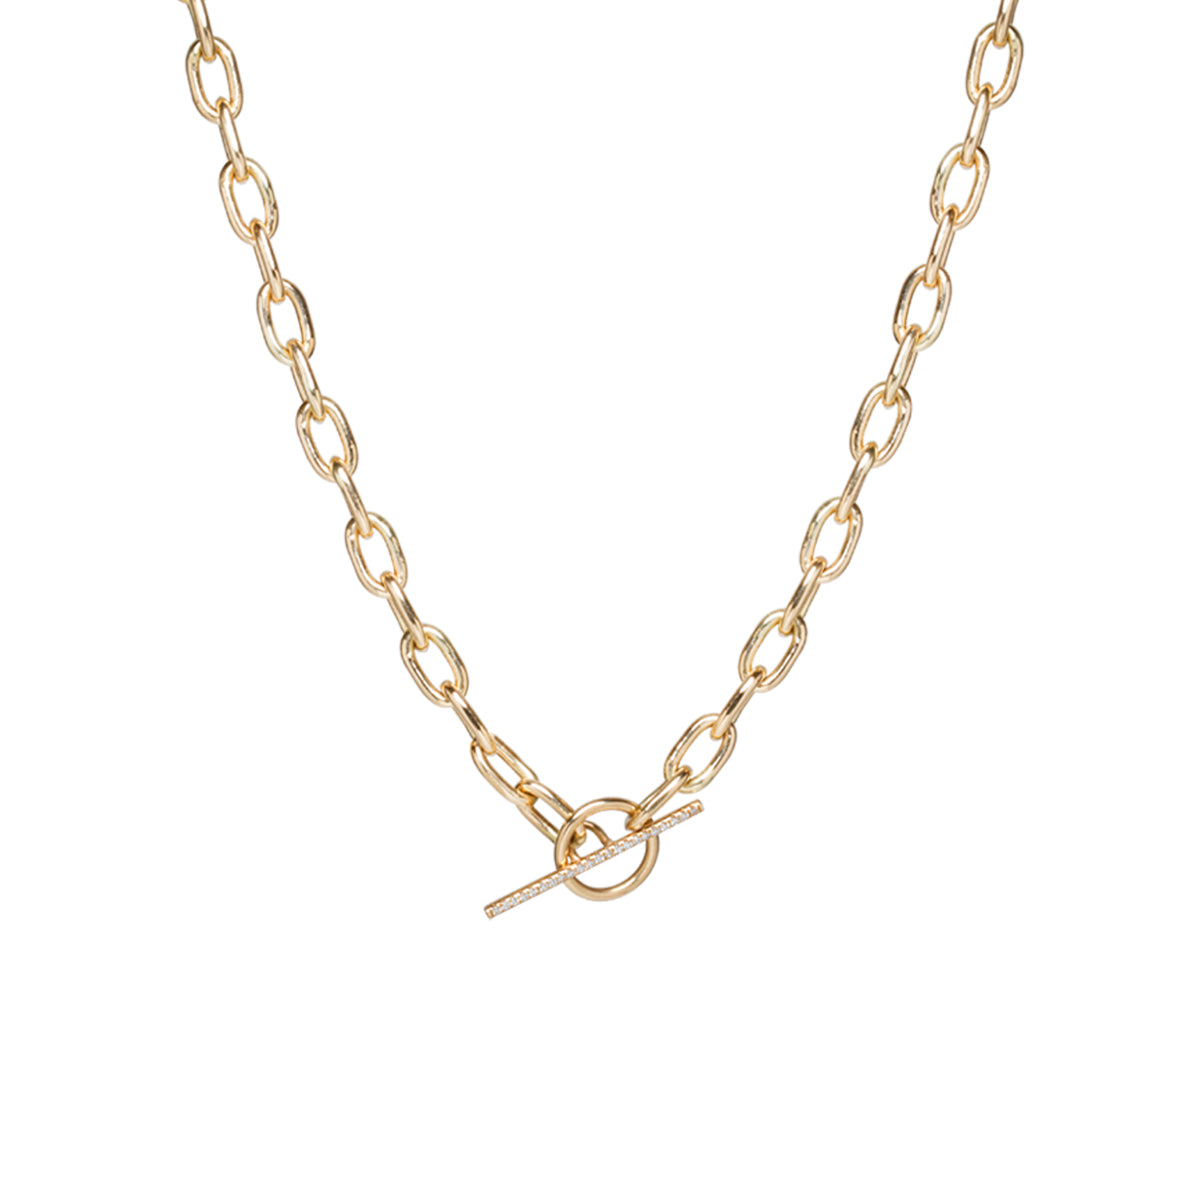 Pavé Diamond Toggle Clasp Chain Link Necklace in 14K Yellow Gold